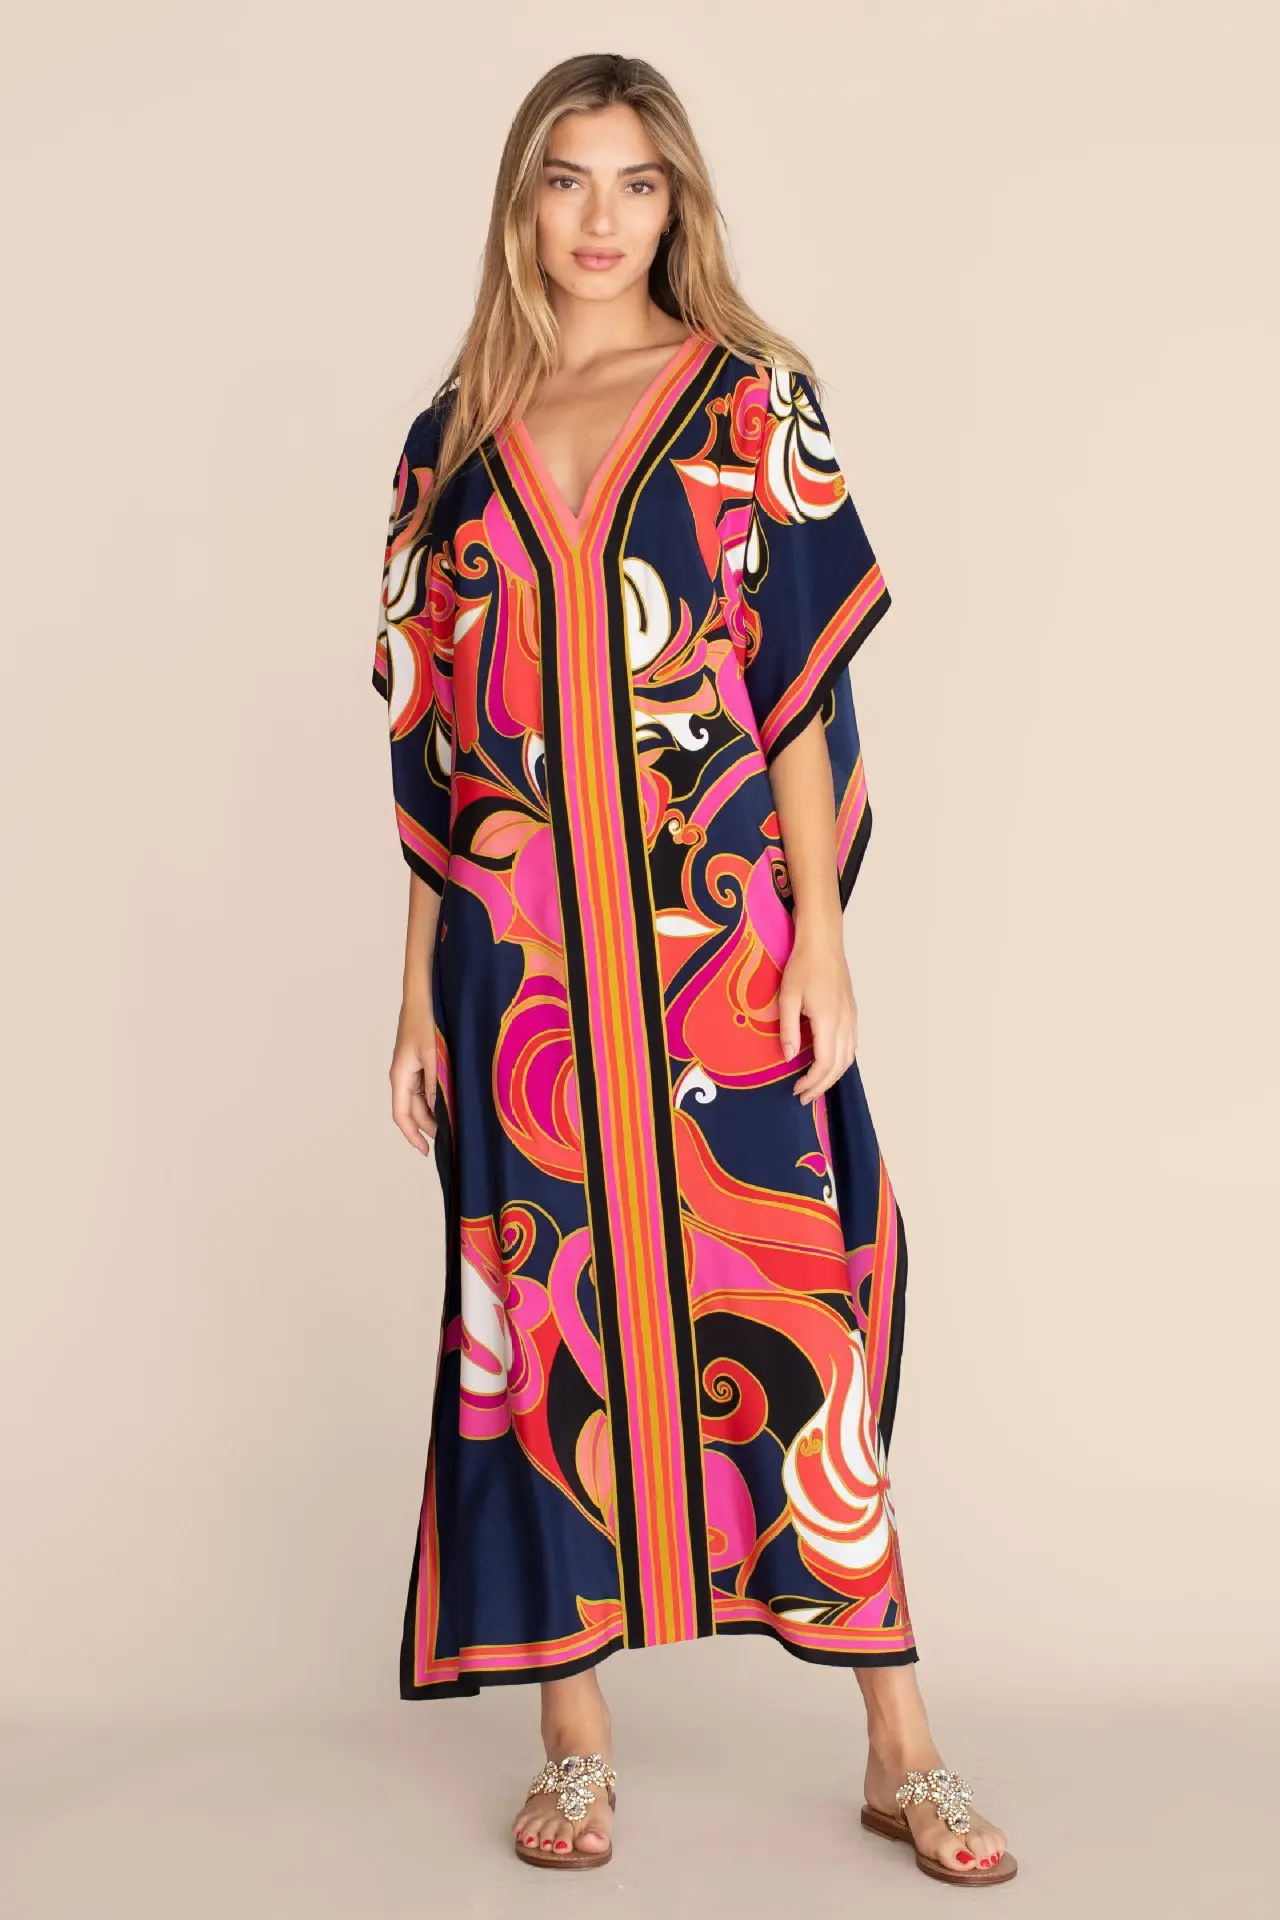 

Printed Kaftans for Women Beach Cover Up Seaside Maxi Bohemian Dresses Beachwear Pareo Bathing Suits Factory Supply Dropshipping